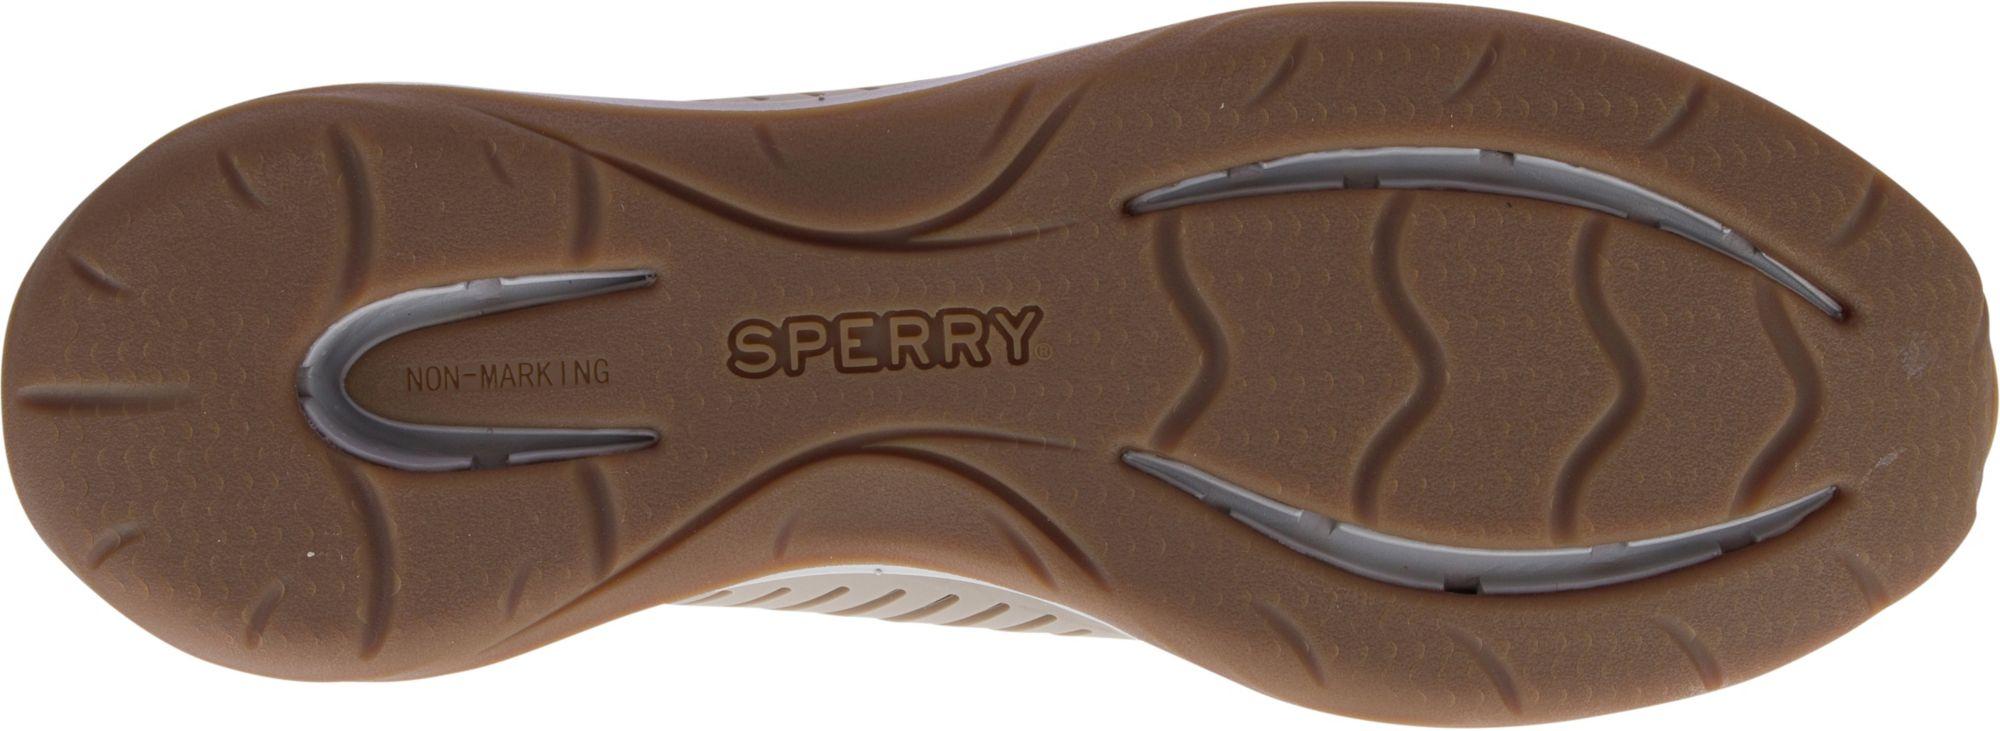 sperry men's h2o skiff boat shoes